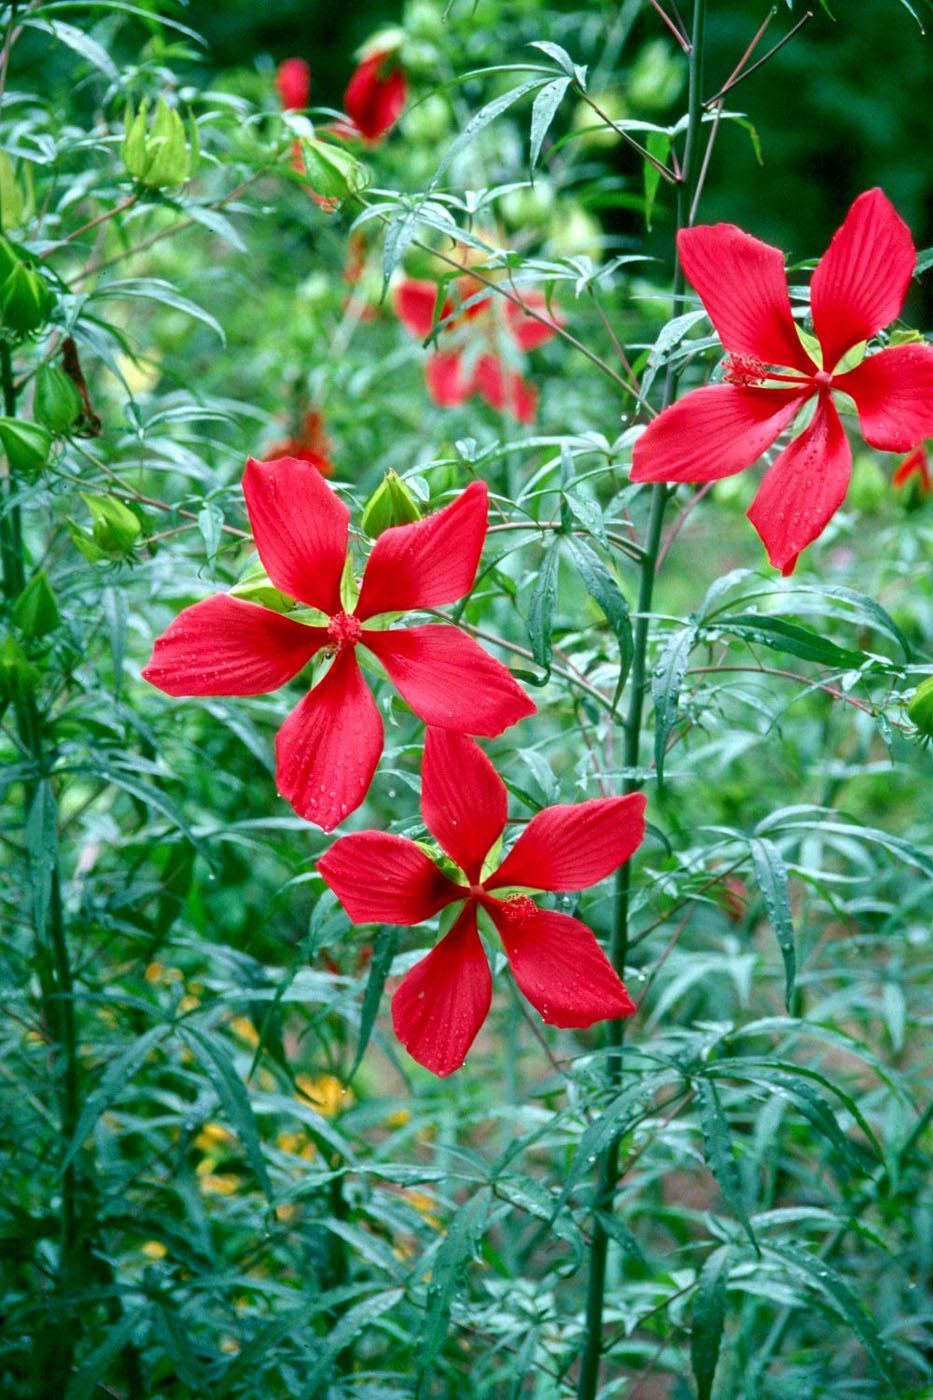 The cold-tolerant perennial Texas Star hibiscus looks equally at home in a tropical or cottage garden and produces some of the tallest plants for the flower border. The scarlet, star-shaped flowers are a favorite of the ruby-throated hummingbird.